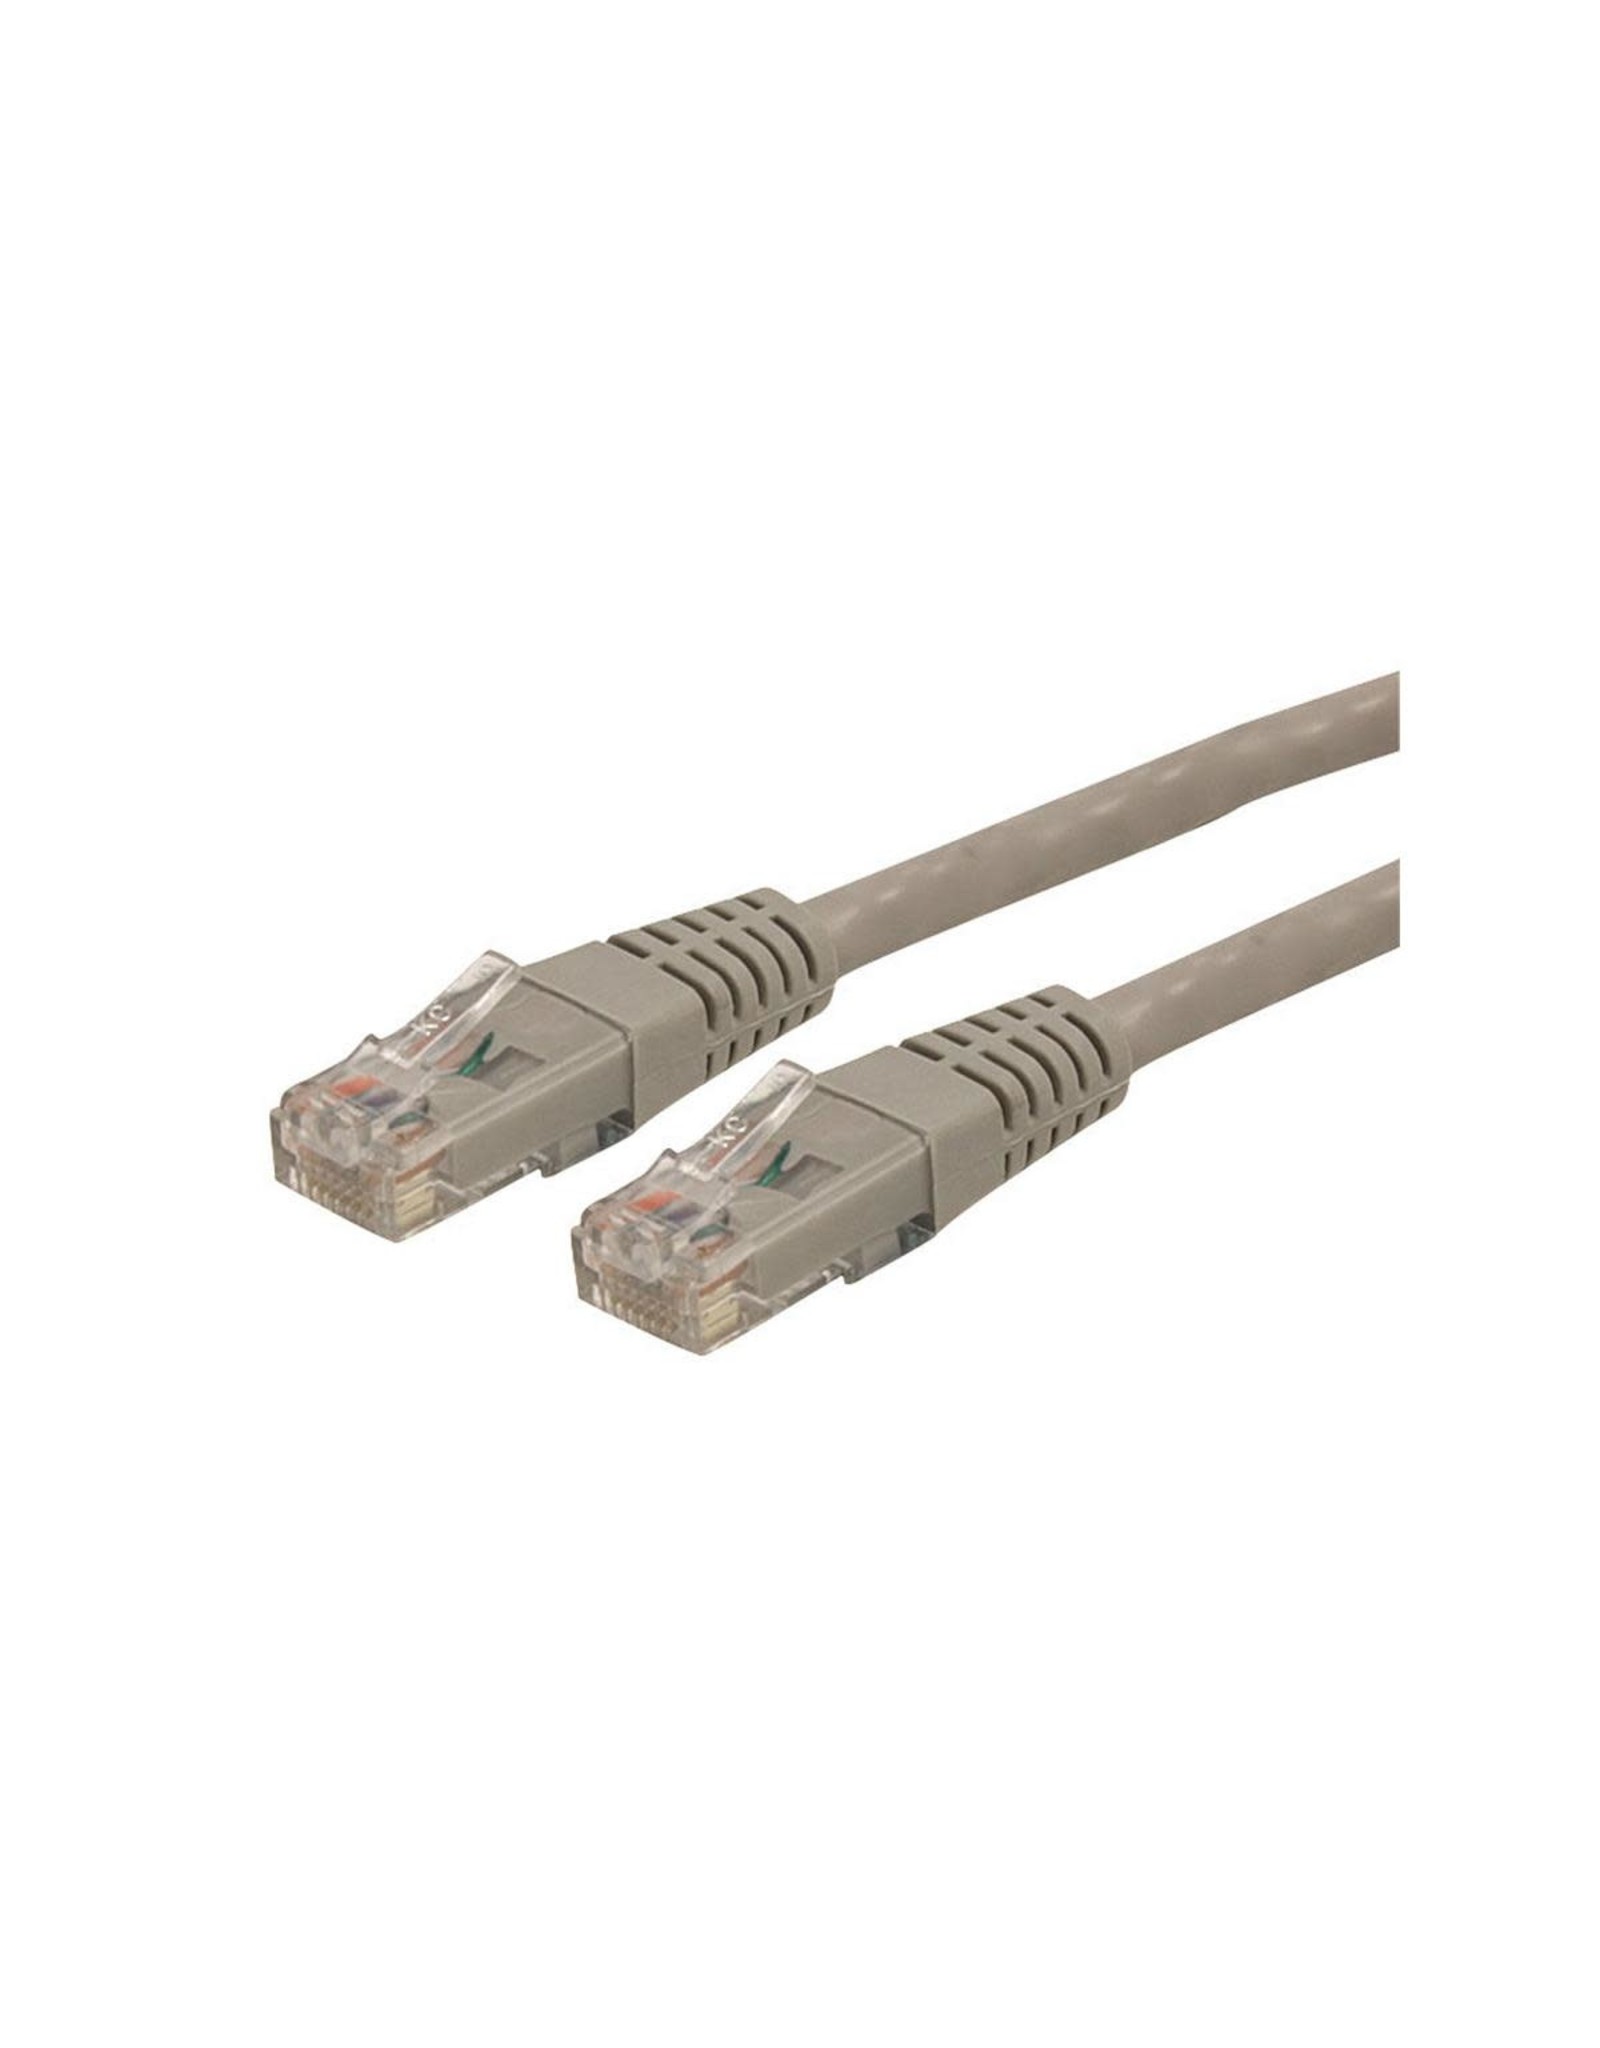 Startech 6FT CAT6 ETHERNET CABLE GRAY CAT 6 POE